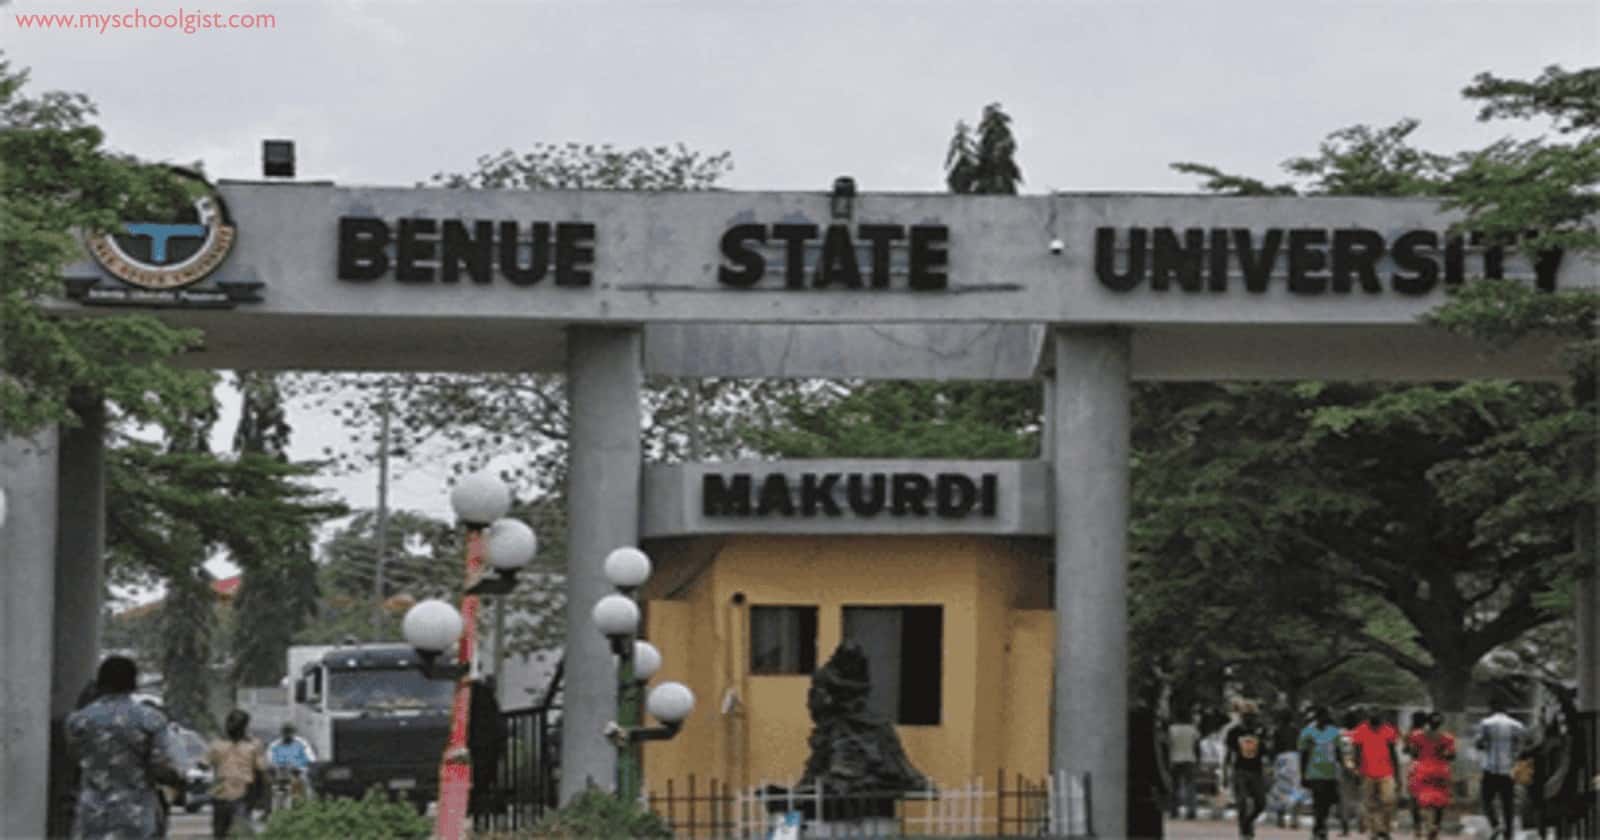 Benue State University Preliminary French Programme Admission Form